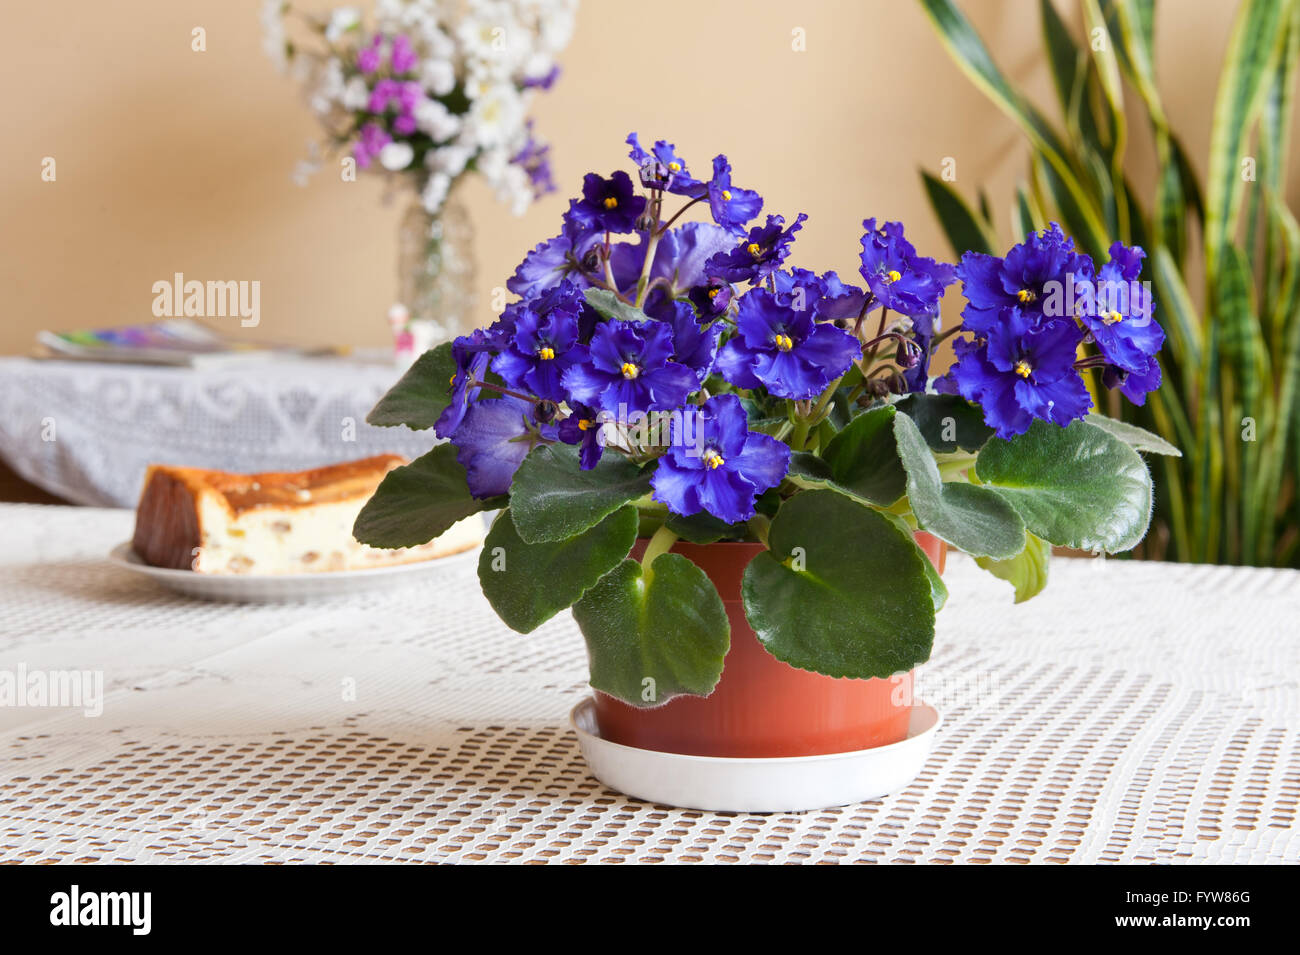 Blooming lush purple African violet, Saintpaulia Ionantha flowering plant in the Gesneriaceae family, household plant bunch. Stock Photo